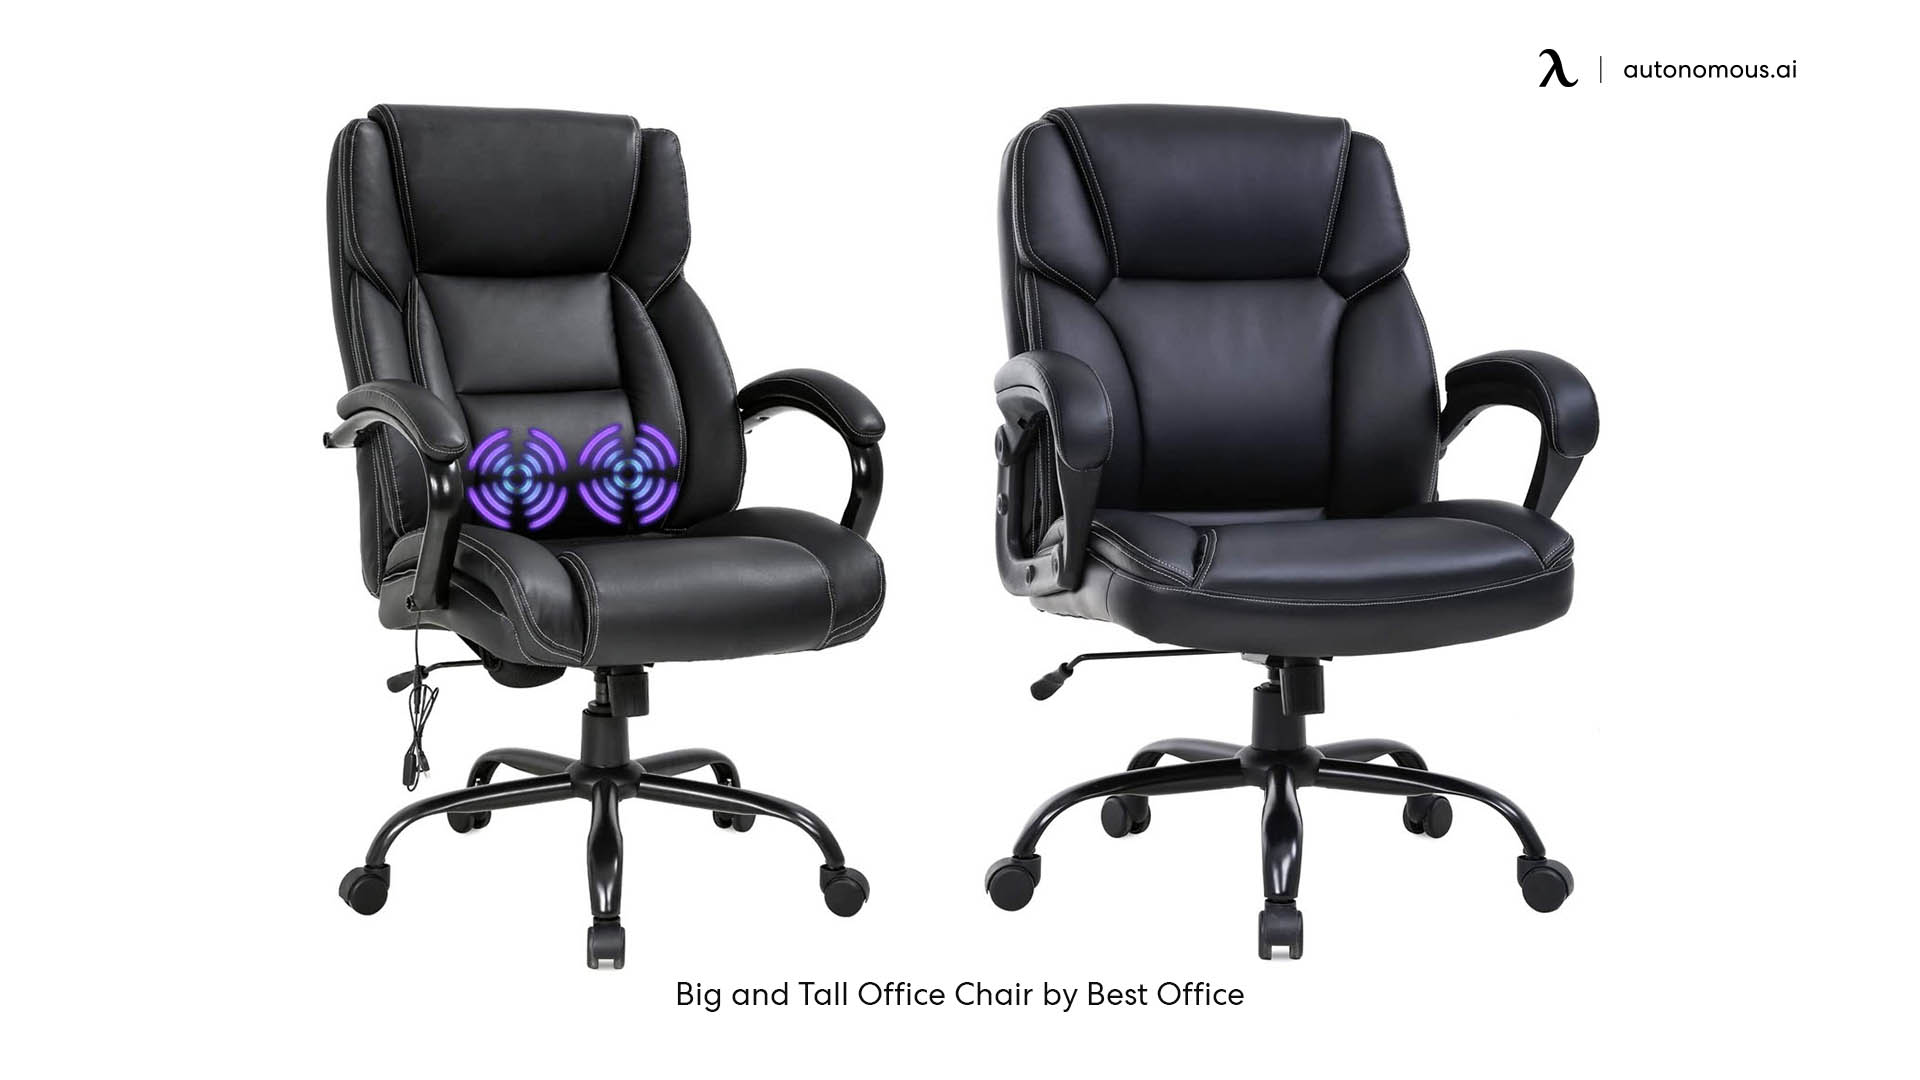 Big and tall office chair